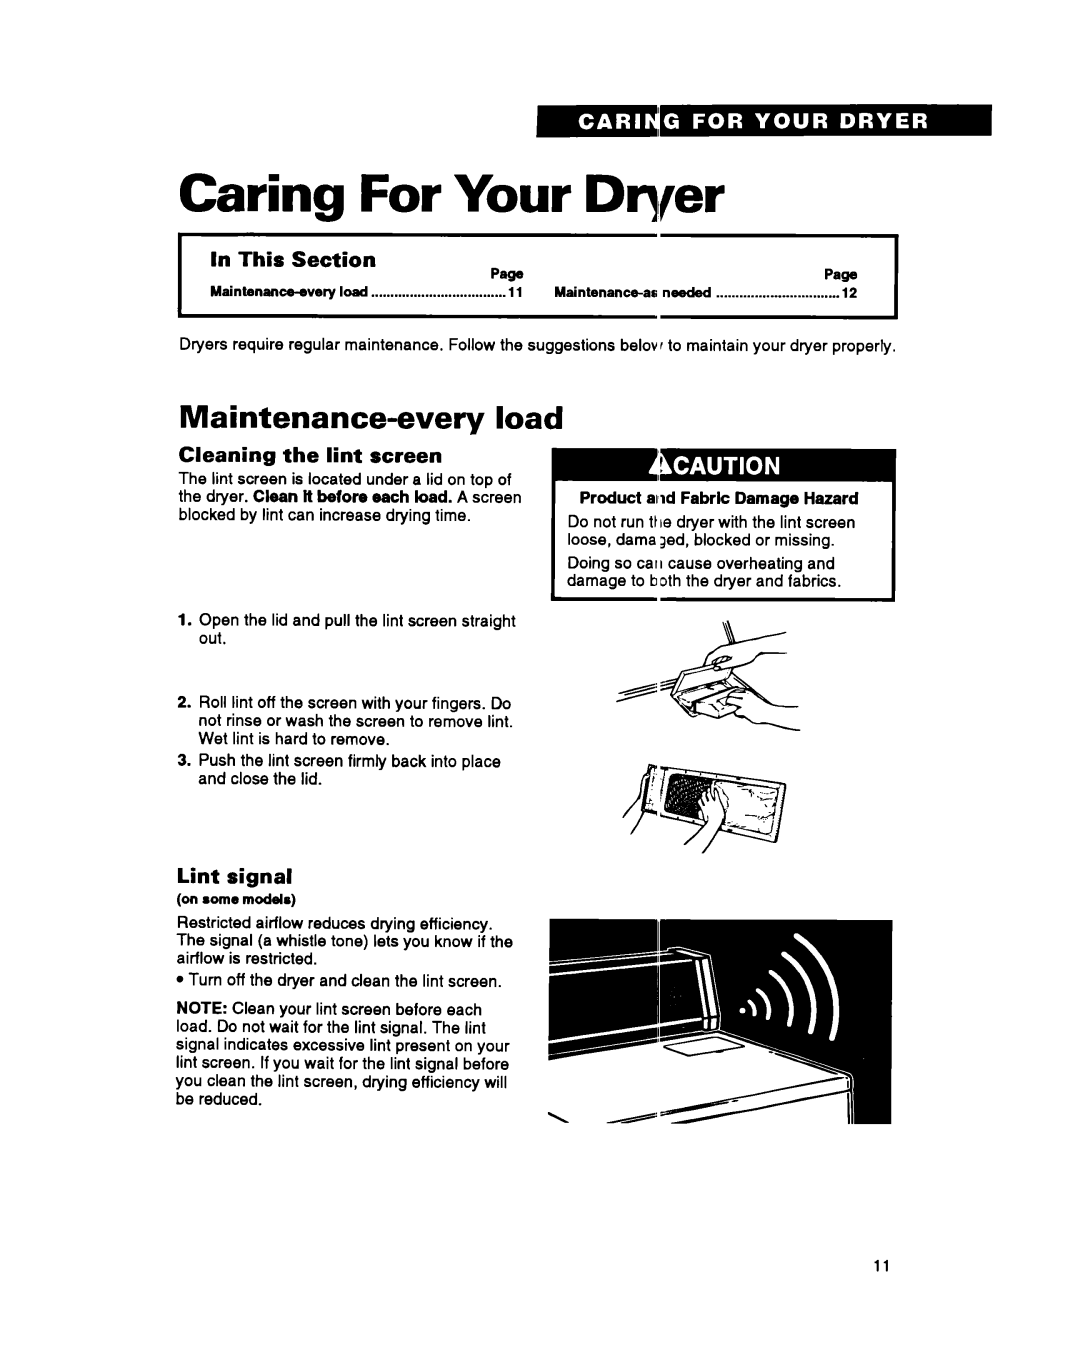 Whirlpool 3396311 manual Caring For Your Dq,fer, Maintenance-every load, In This Section Paw, Cleaning the lint screen 